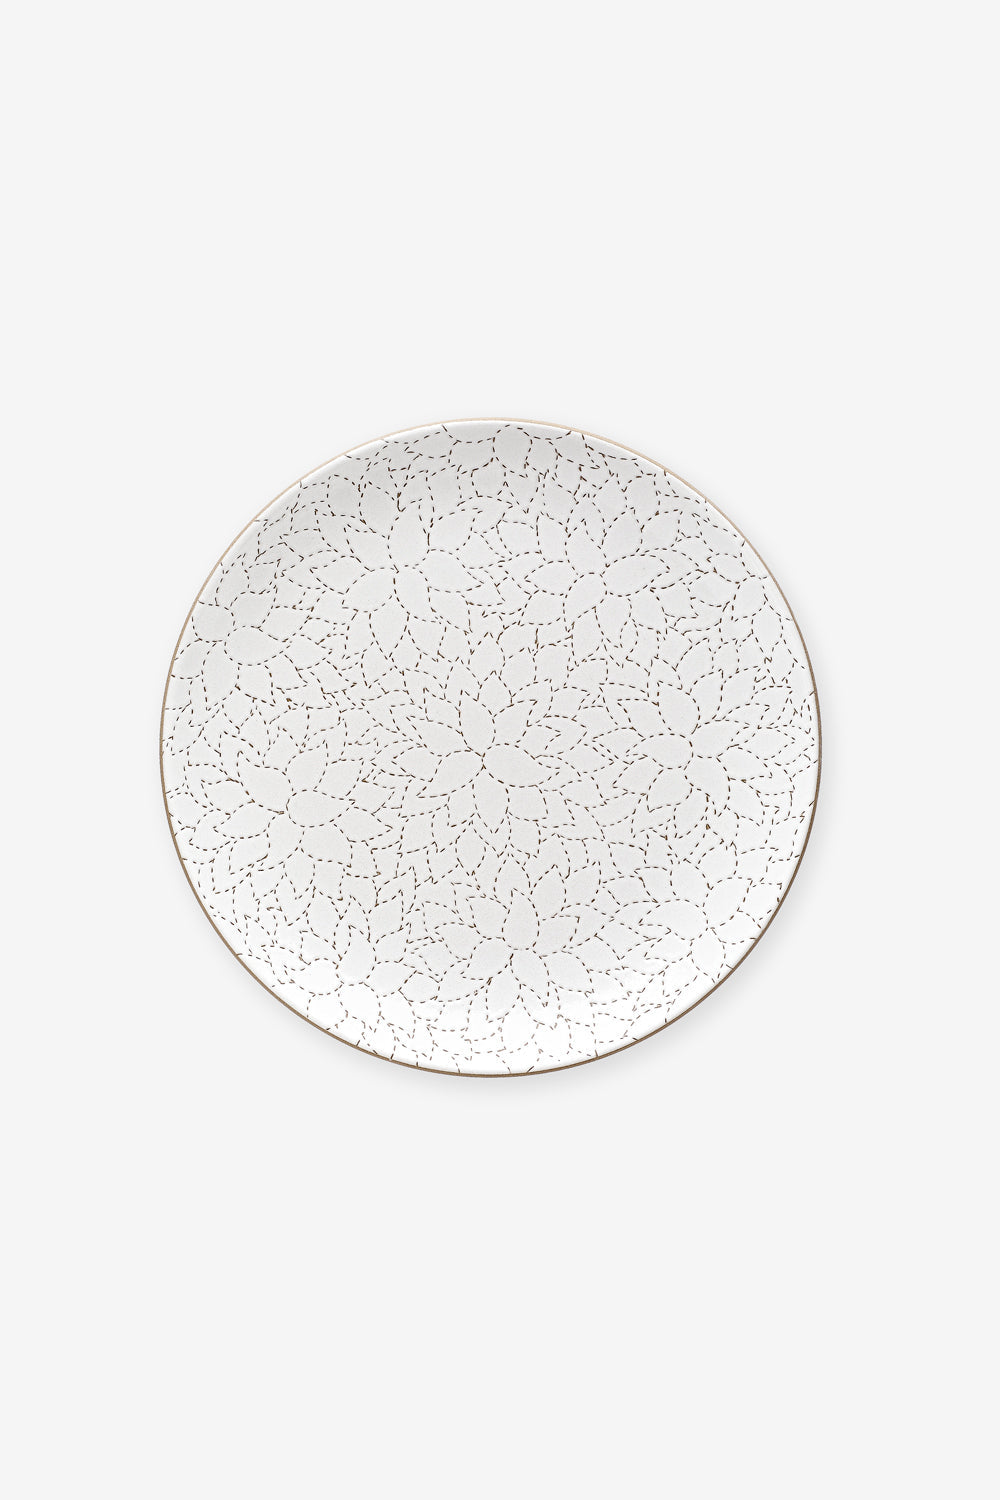 image of Camellia Etched Dinner Plate